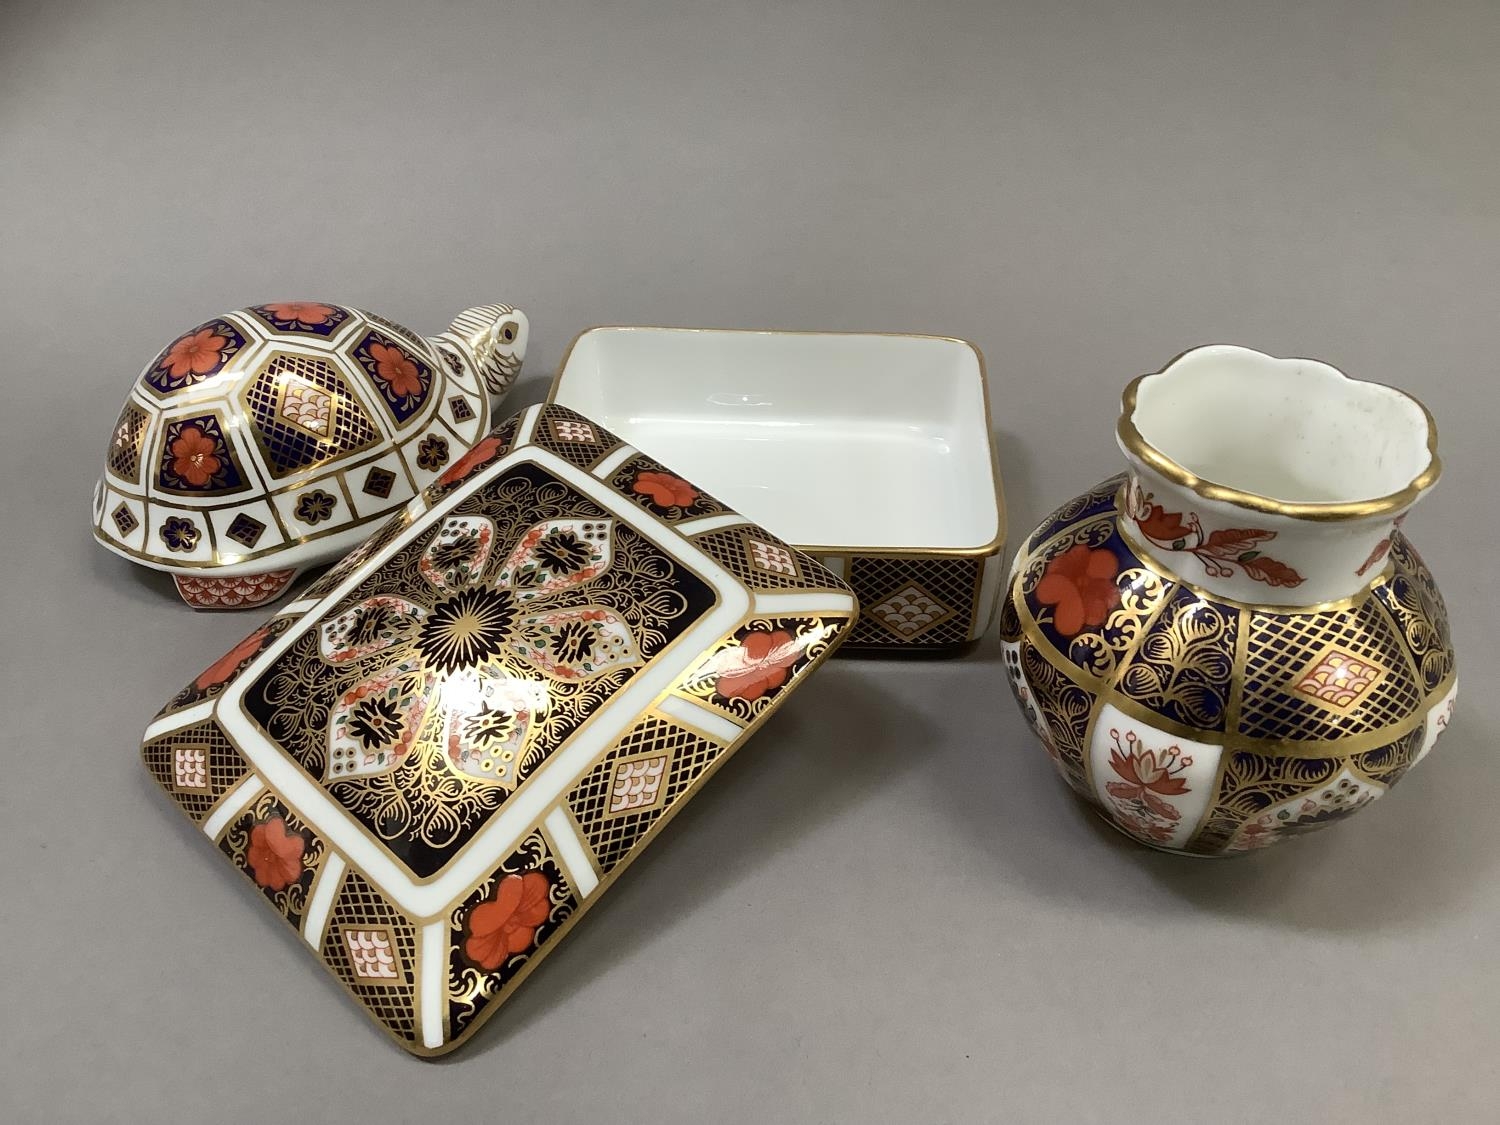 A Royal Crown Derby box and cover, pattern No: 1128, measuring 11cm x 9.5cm x 3.5cm, a vase, - Image 3 of 4